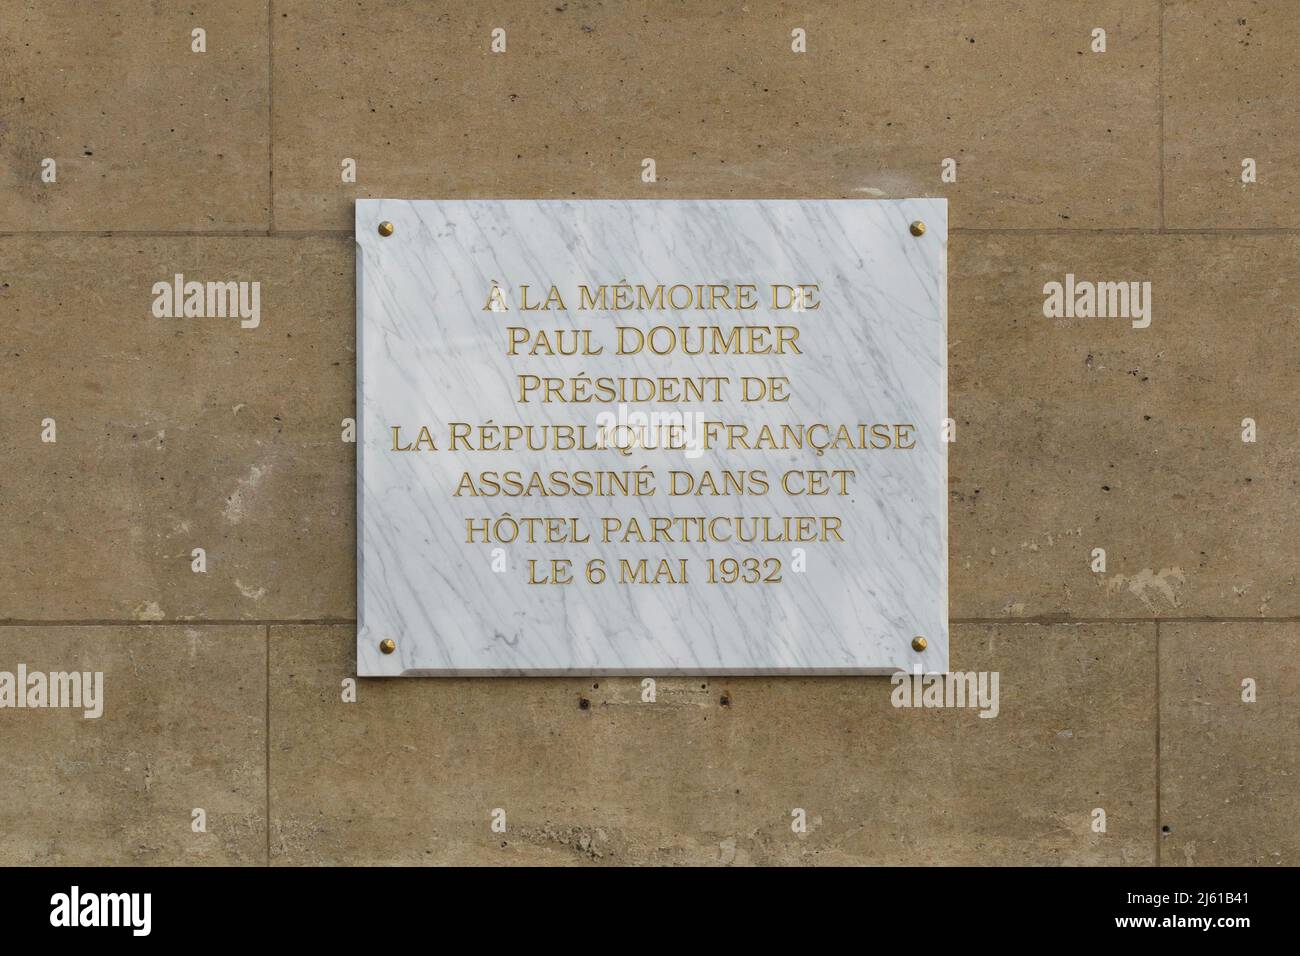 Commemorative plaque devoted to French President Paul Doumer on the Hôtel Salomon de Rothschild in Paris, France. President Paul Doumer was assassinated at this place by Russian émigré Paul Gorguloff (also spelled as Pavel Gorgulov) on 6 May 1932. Stock Photo